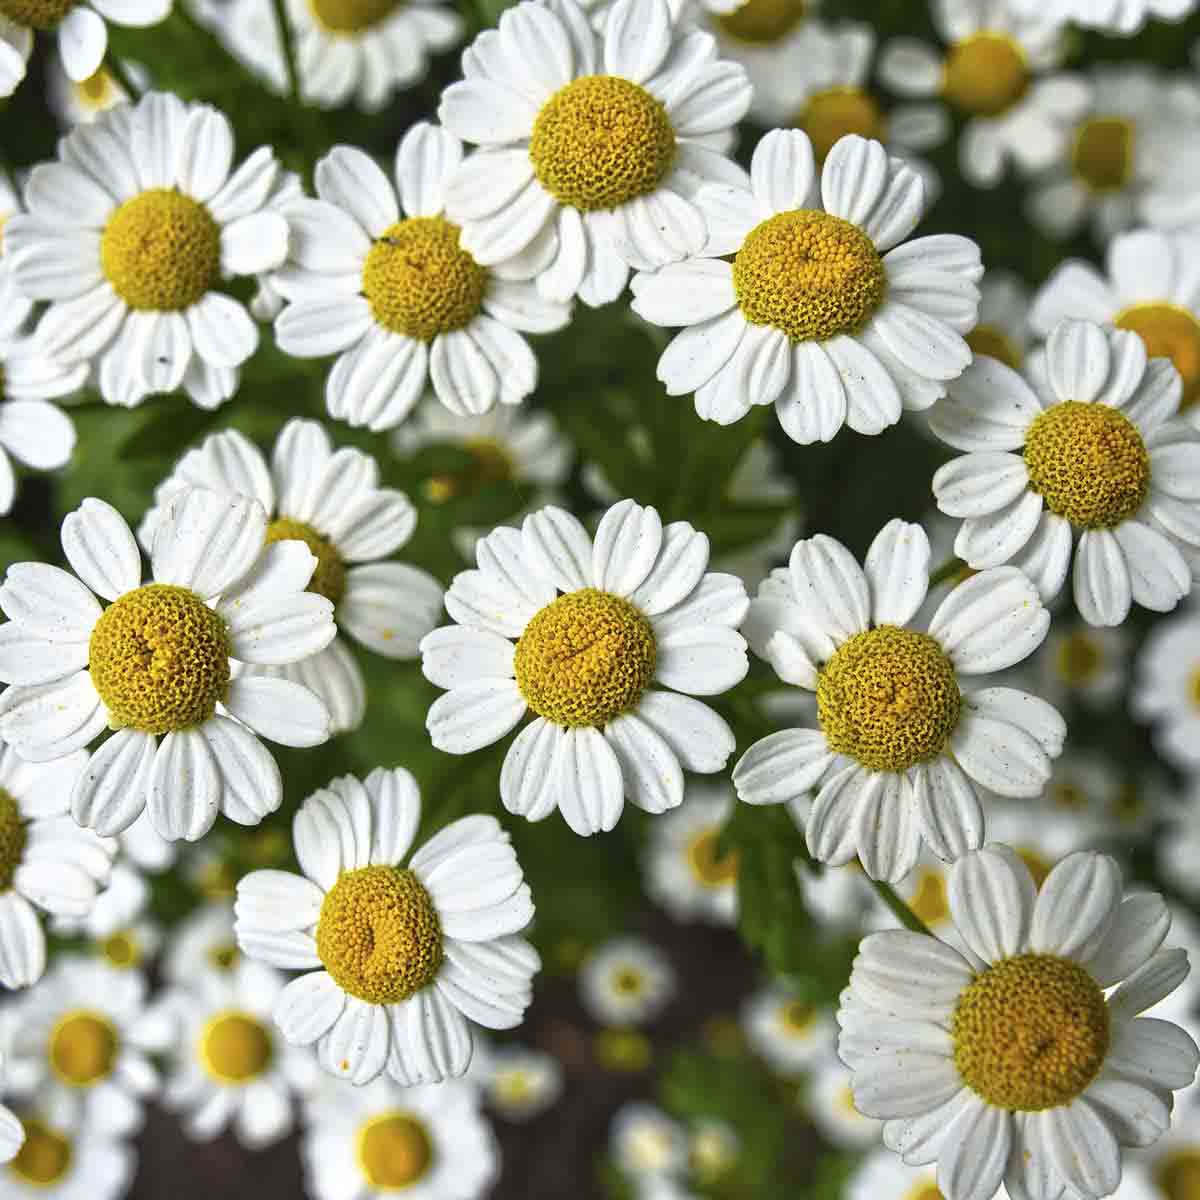 Dozens of chamomile flowers growing together.